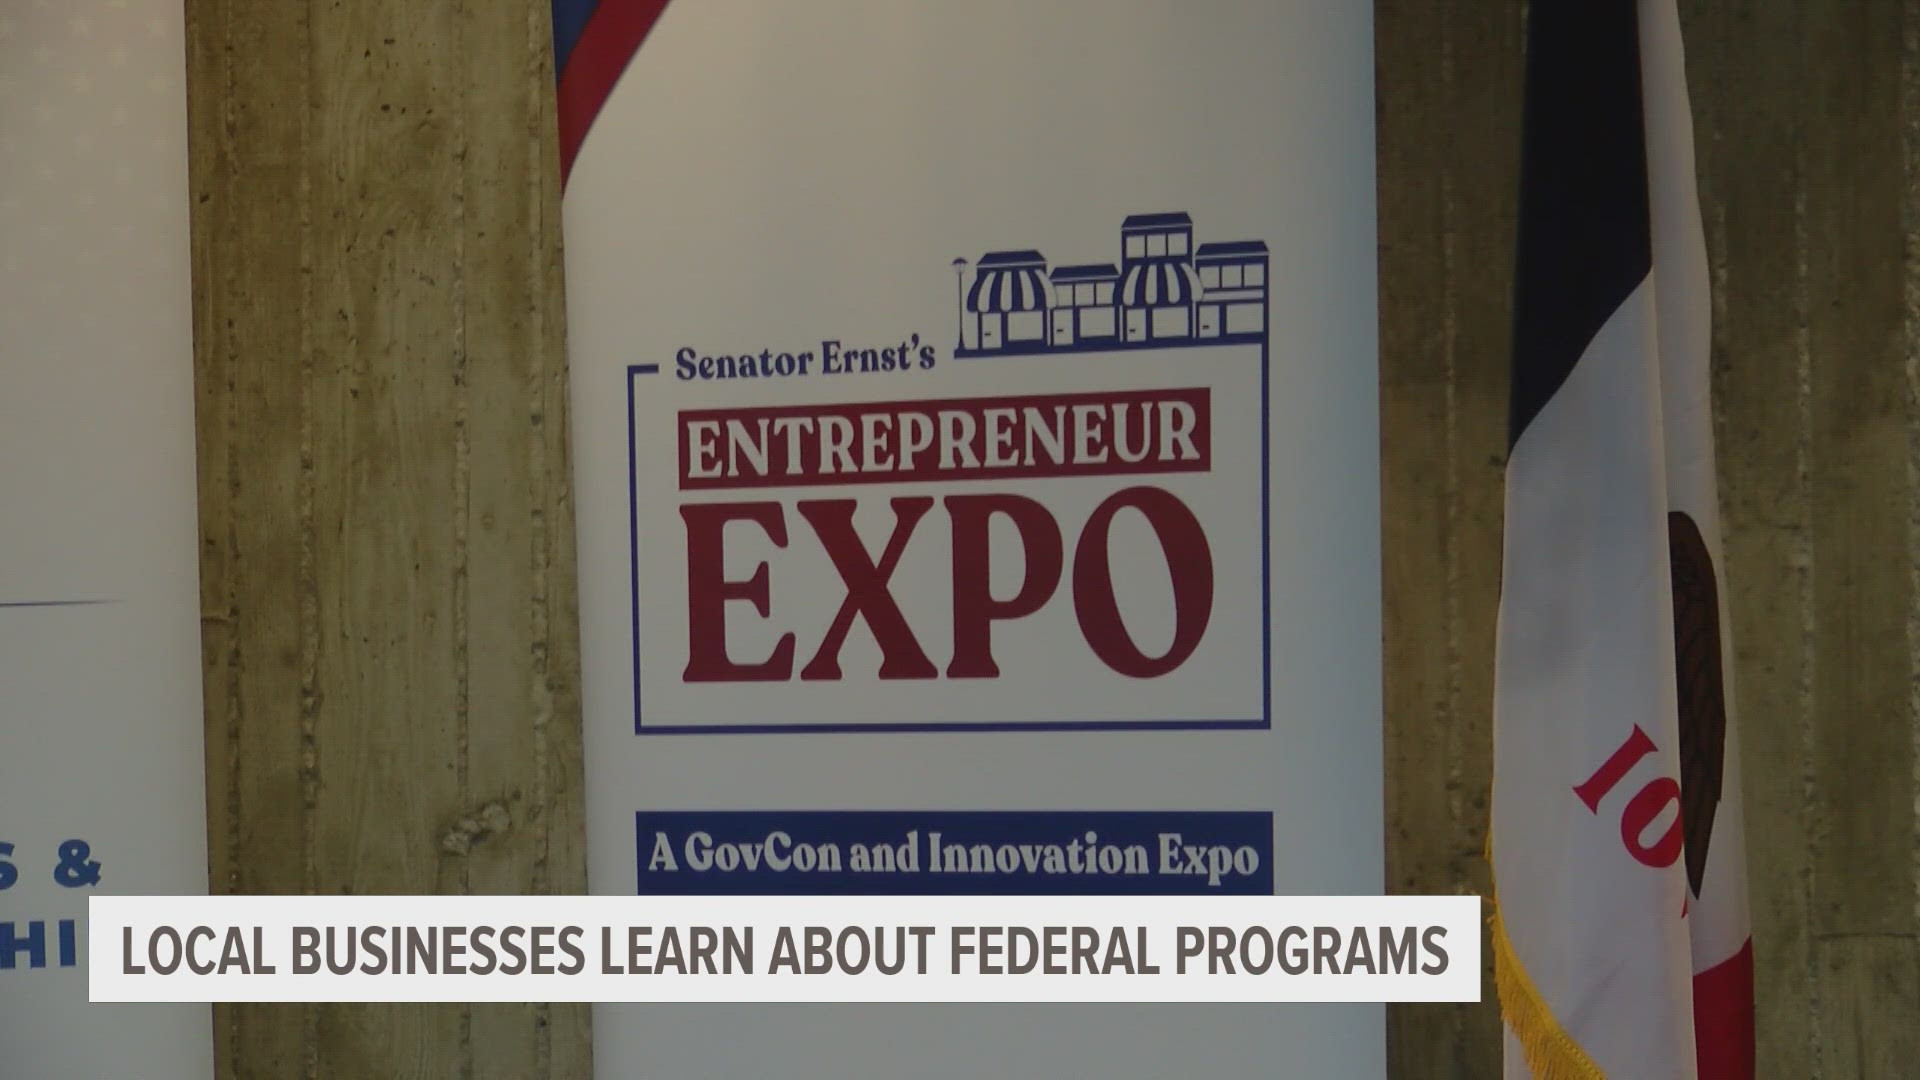 U.S. Sen. Joni Ernst hosted an entrepreneur expo at Iowa State University to explain how local businesses can get federal contracting opportunities.